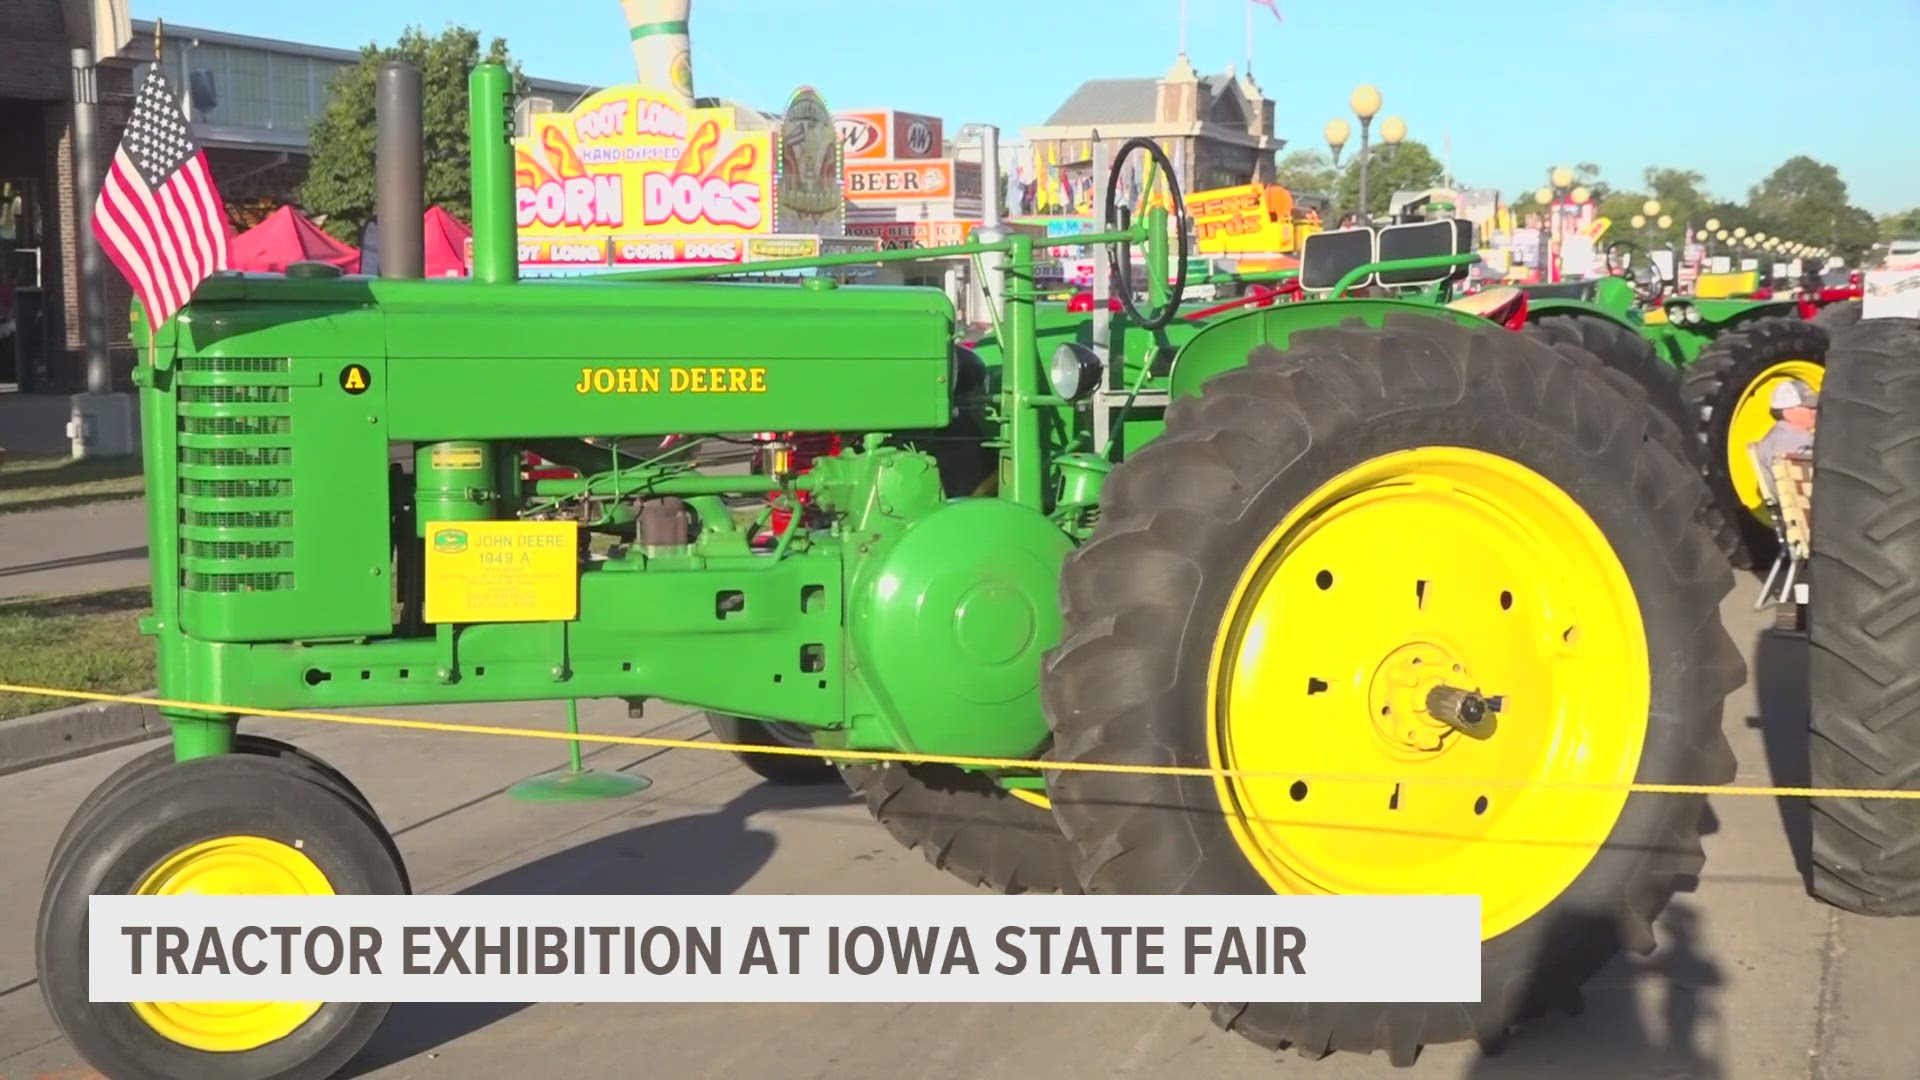 Find more than 70 tractors on the Grand Concourse at the Iowa State Fair until 5 p.m. Wednesday.